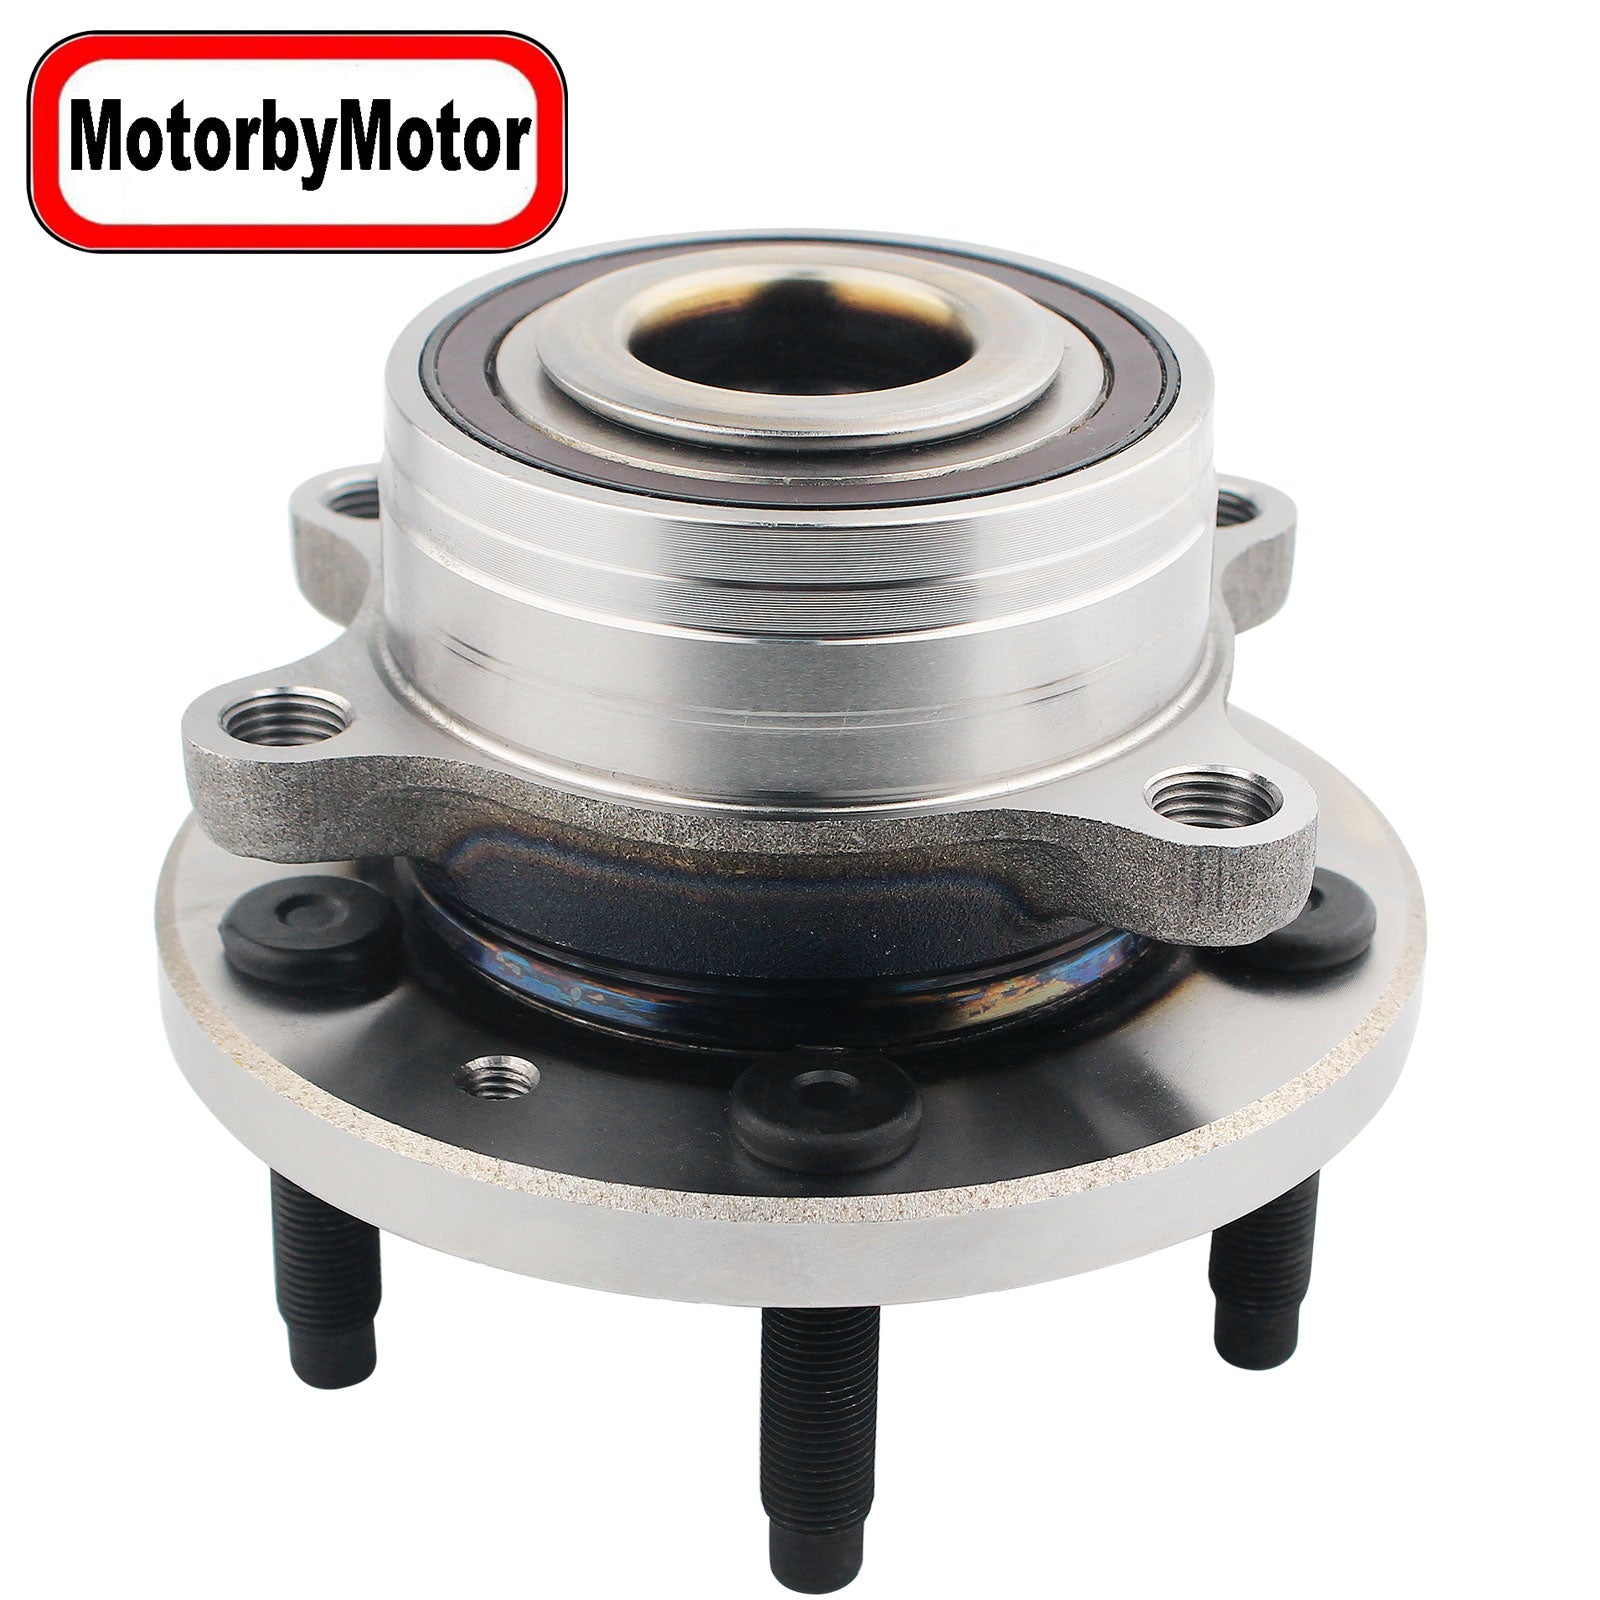 MotorbyMotor 512460 Front/Rear Wheel Bearing and Hub Assembly with 5 Lugs fits for Ford Explorer,Ford Police Interceptor Utility Low-Runout OE Directly Replacement Hub Bearing MotorbyMotor